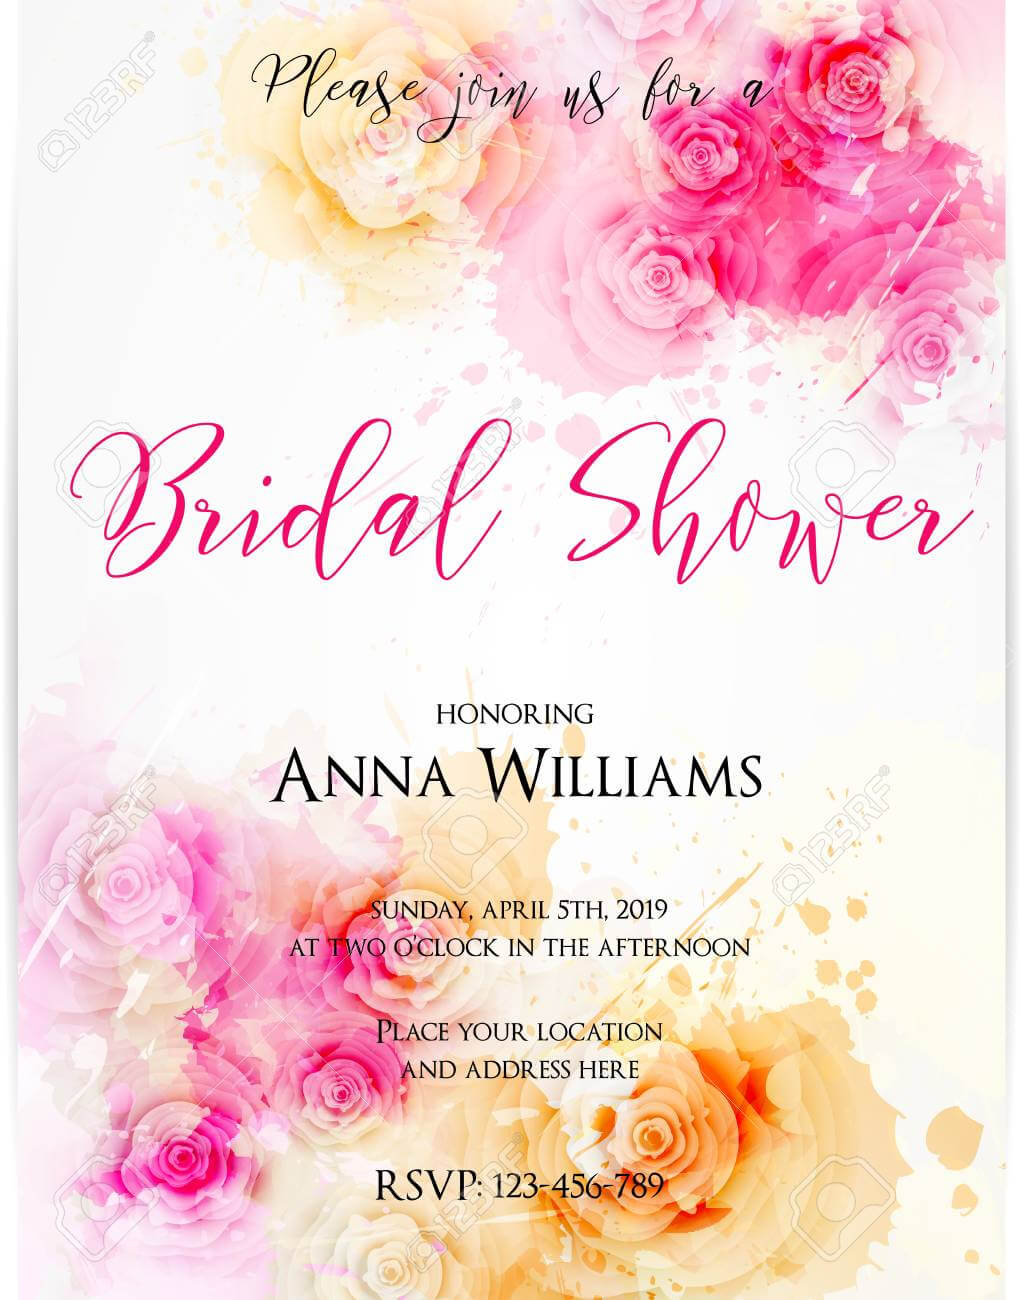 012 Bridal Shower Invitation Template With Abstract Roses On With Bridal Shower Invite Template